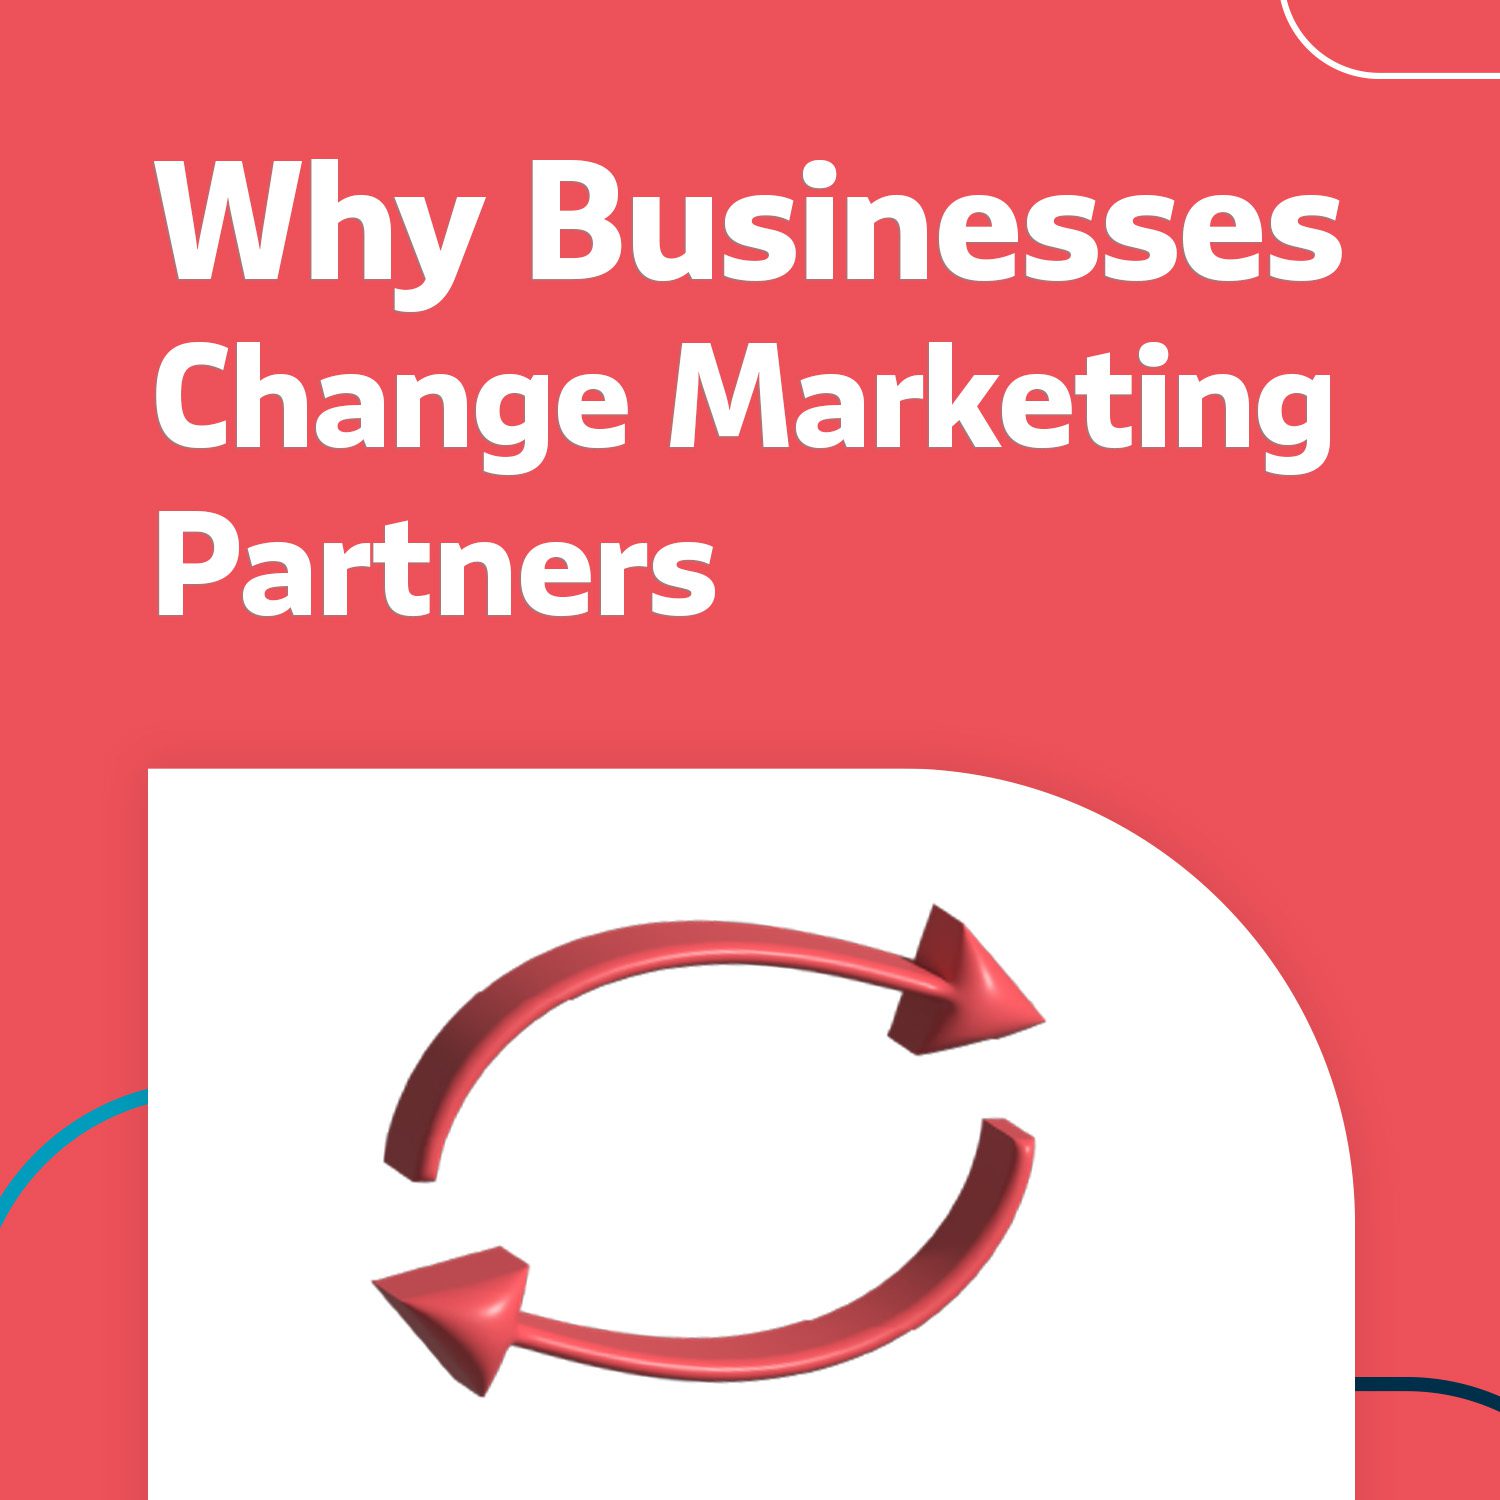 Reasons for changing marketing partners